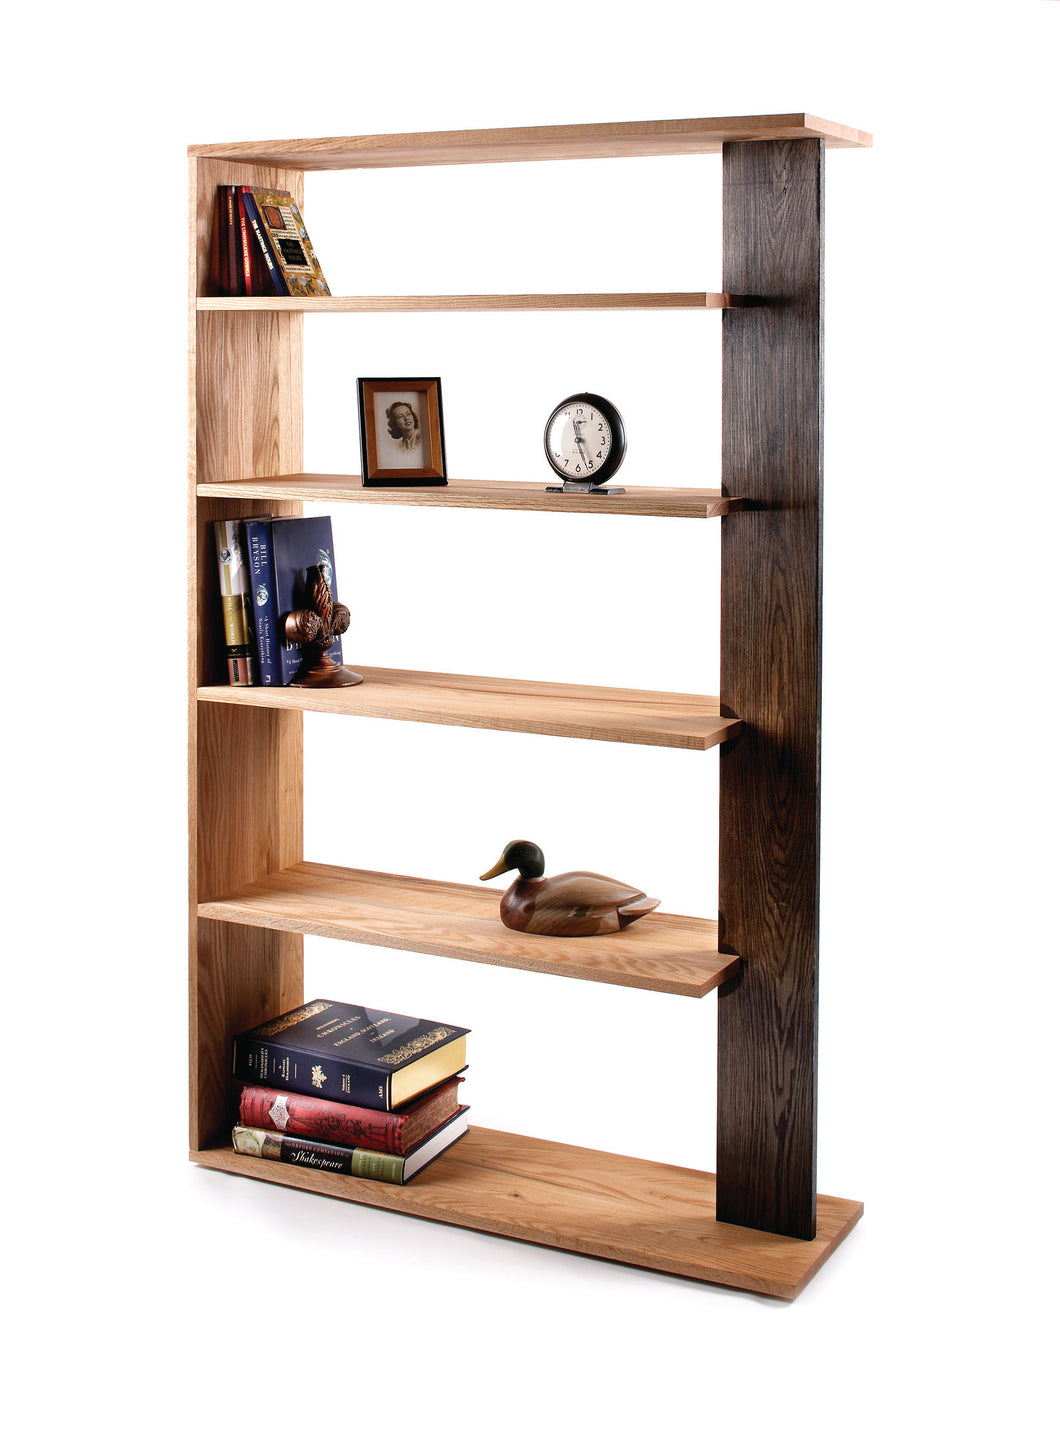 Contemporary Bookshelves Project Download